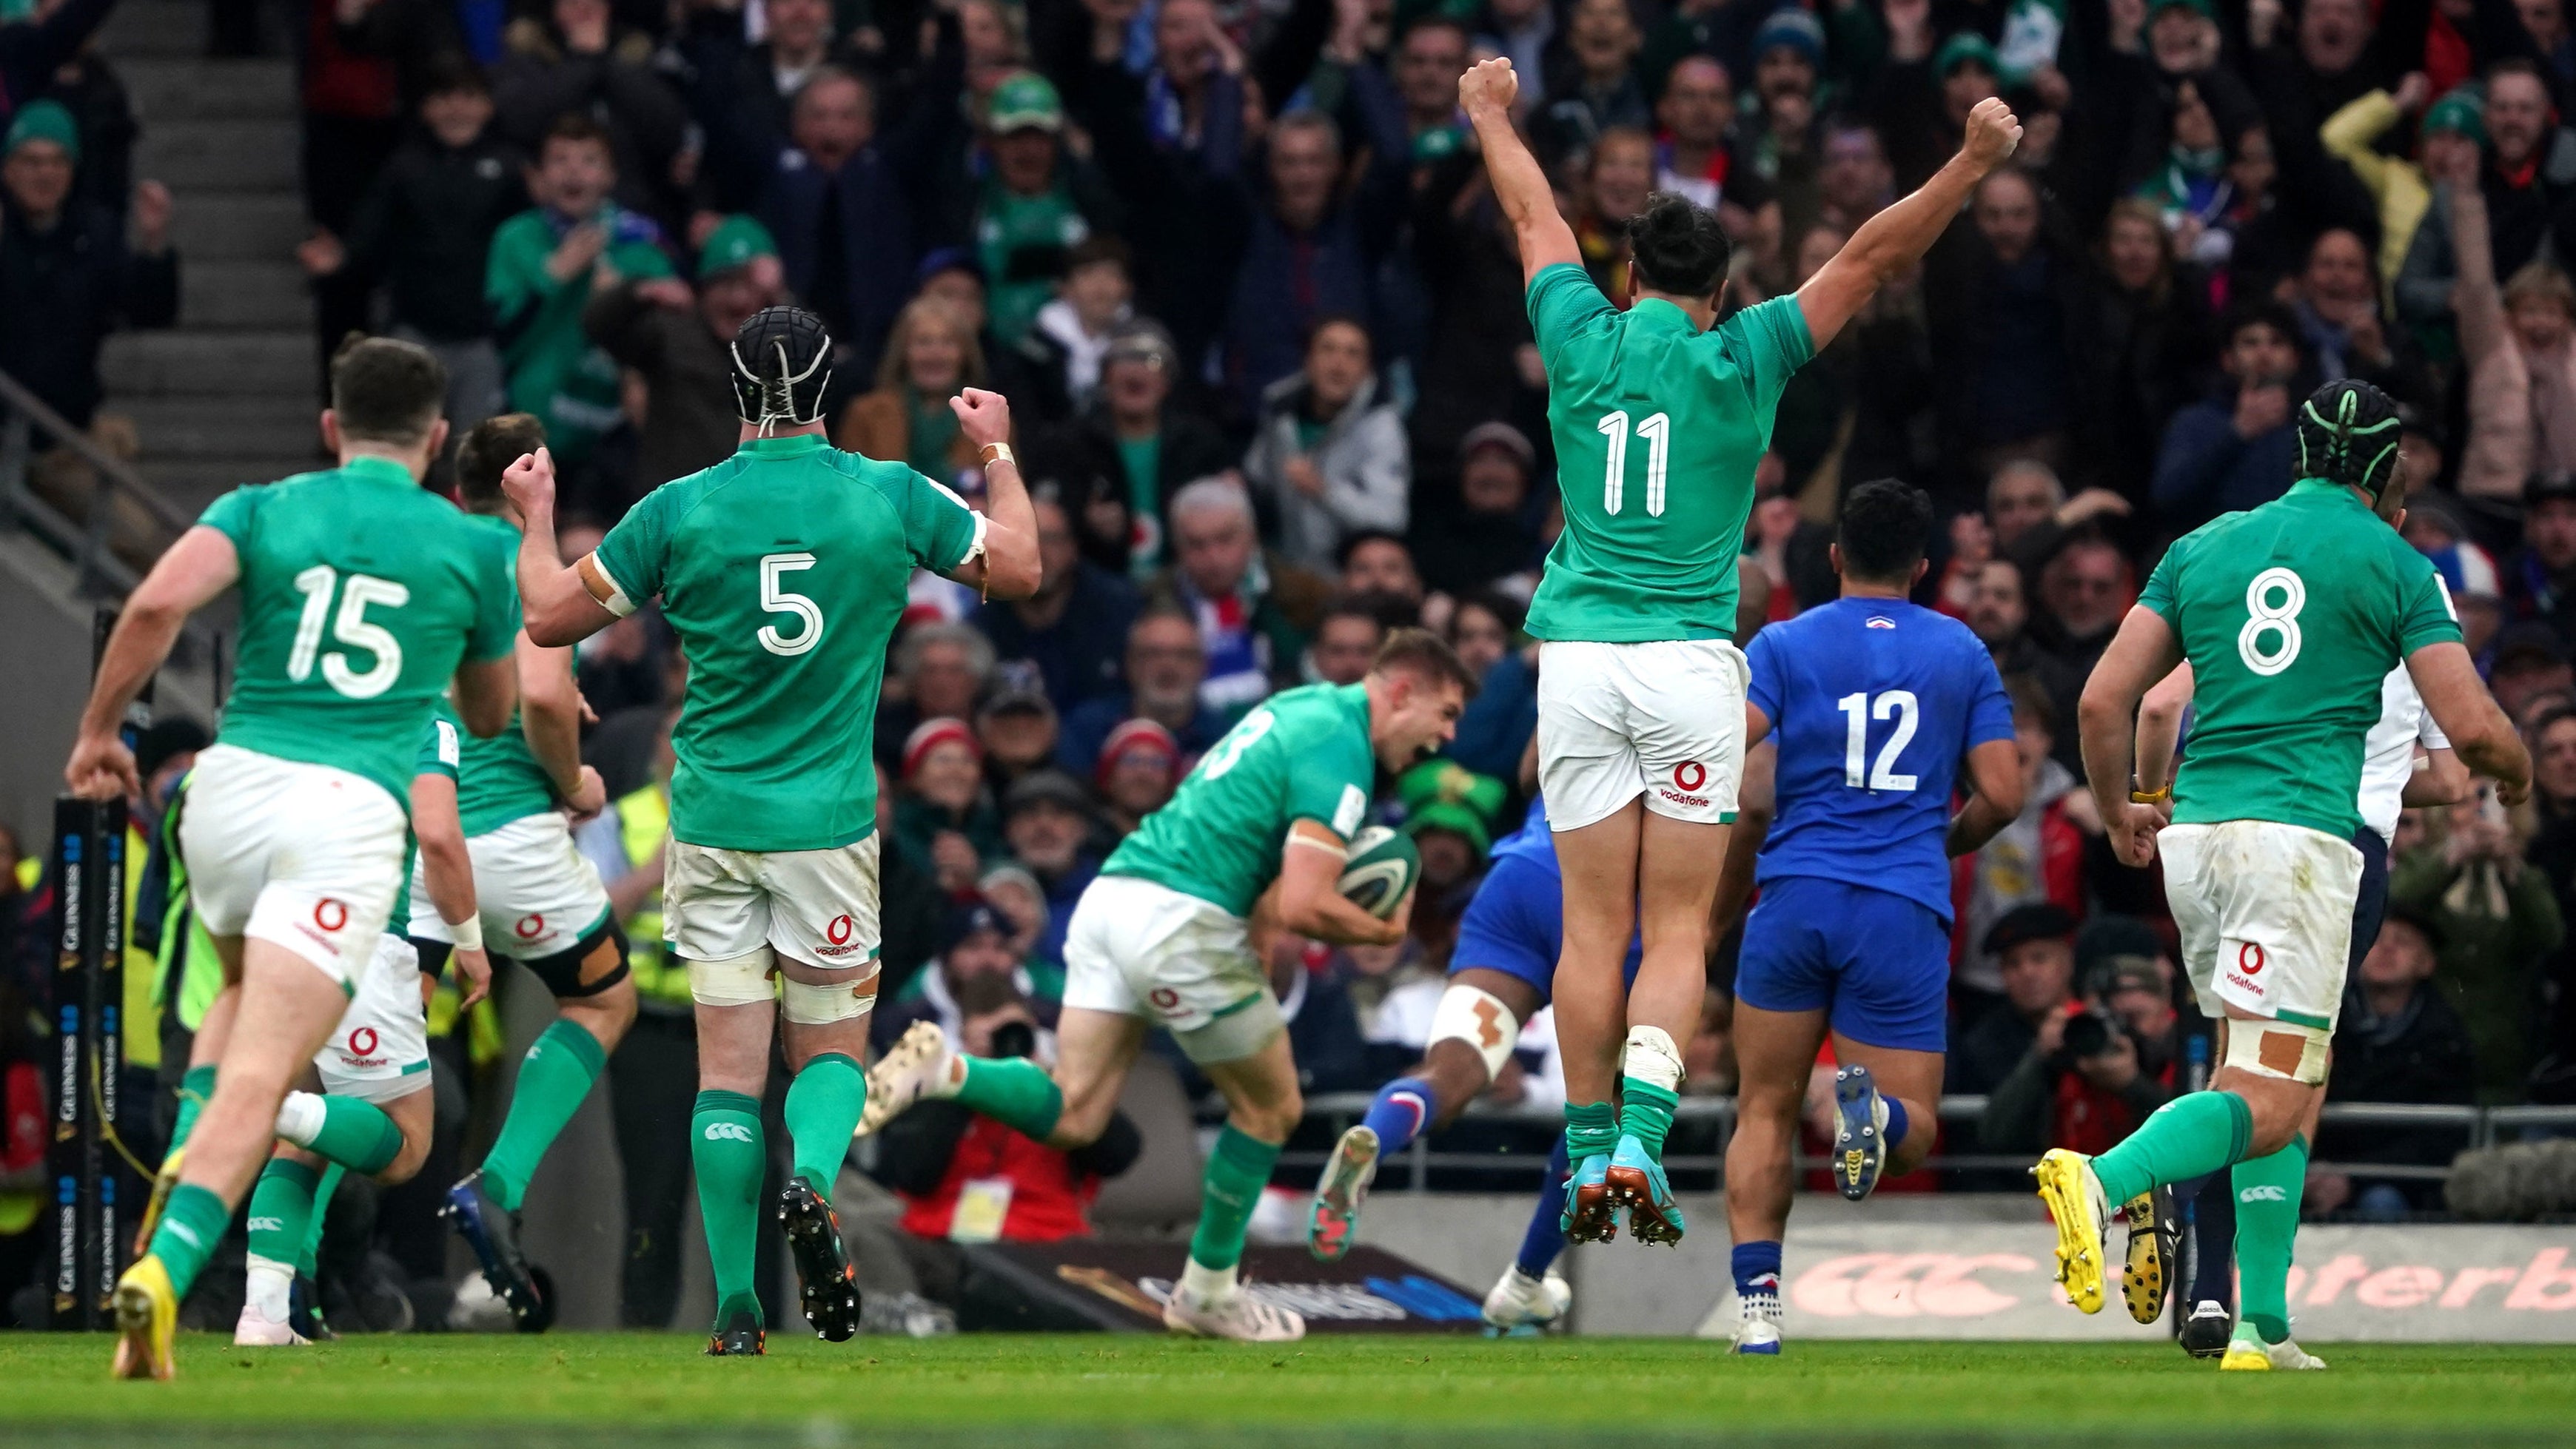 Ireland impressed to beat France in a thriller